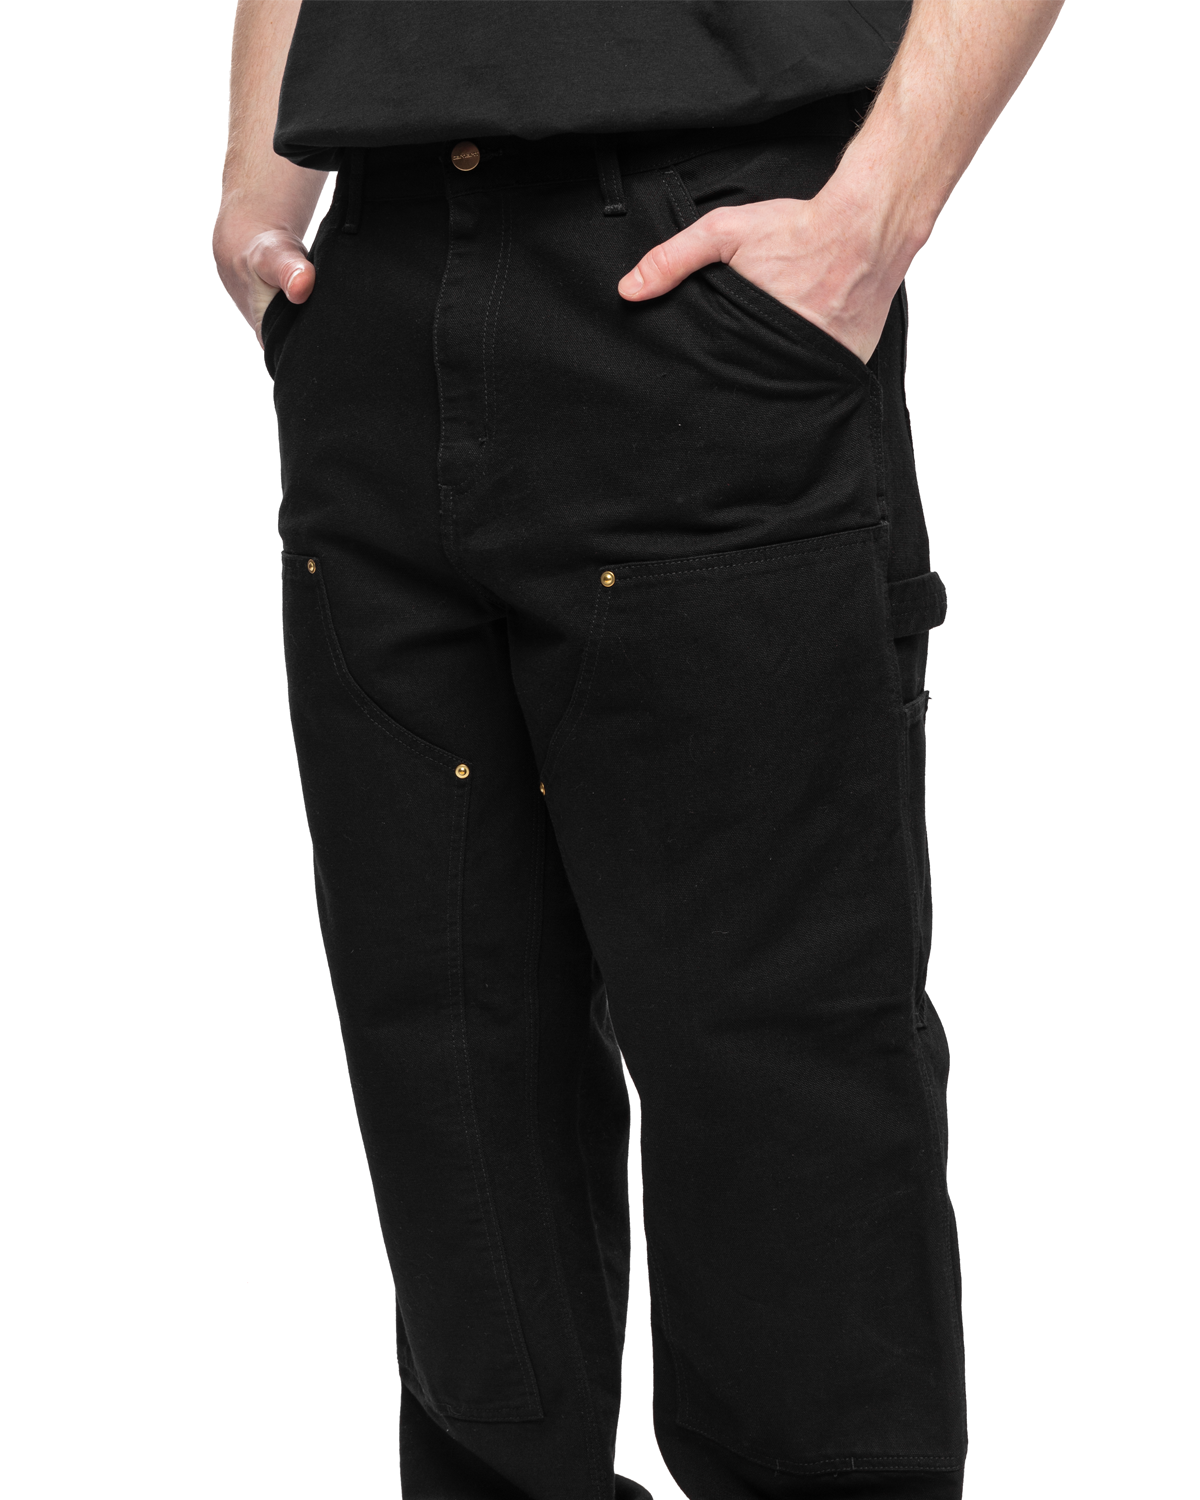 SS24 Double Knee Pant Black (Rinsed)